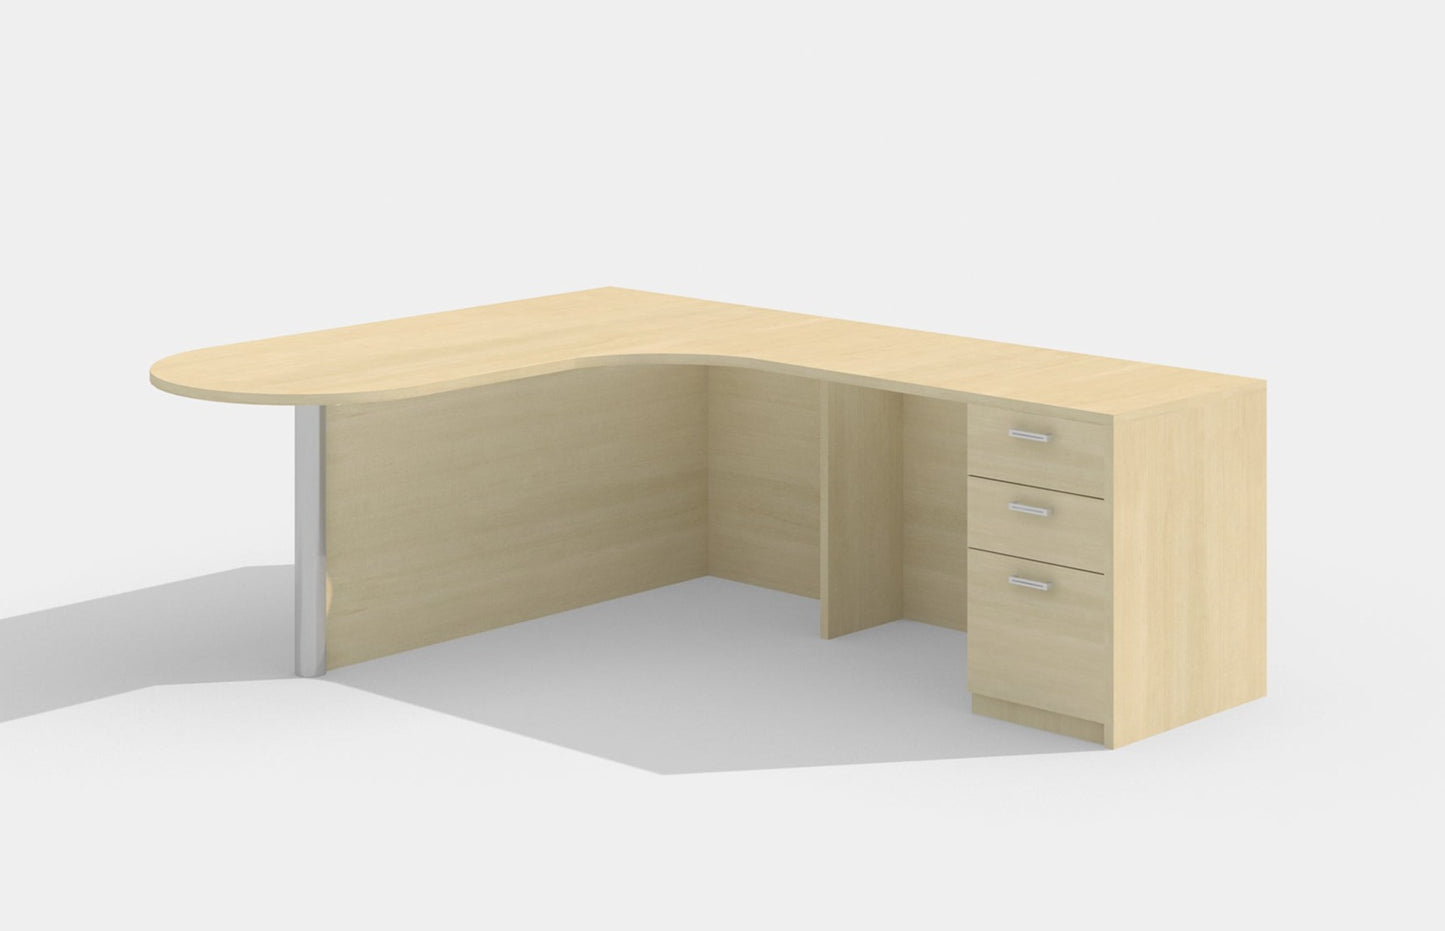 Load image into Gallery viewer, Amber 6x6 L Shaped Executive Office Bullet Desk by Cherryman Industries
